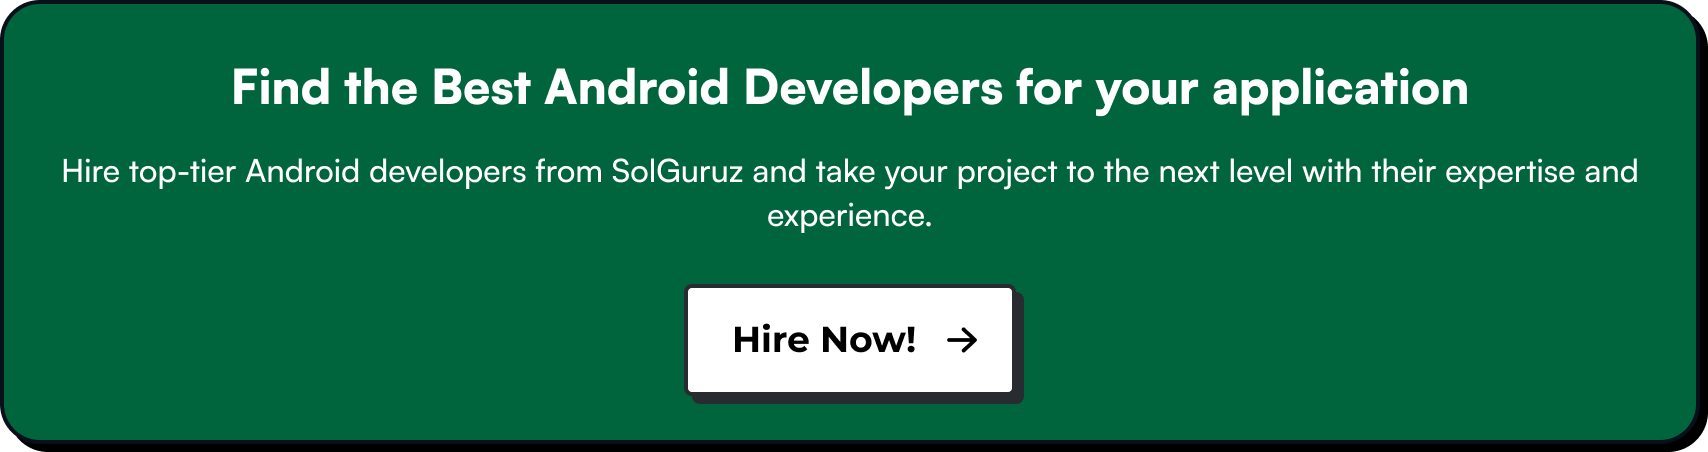 Find the Best Android Developers for your application idea